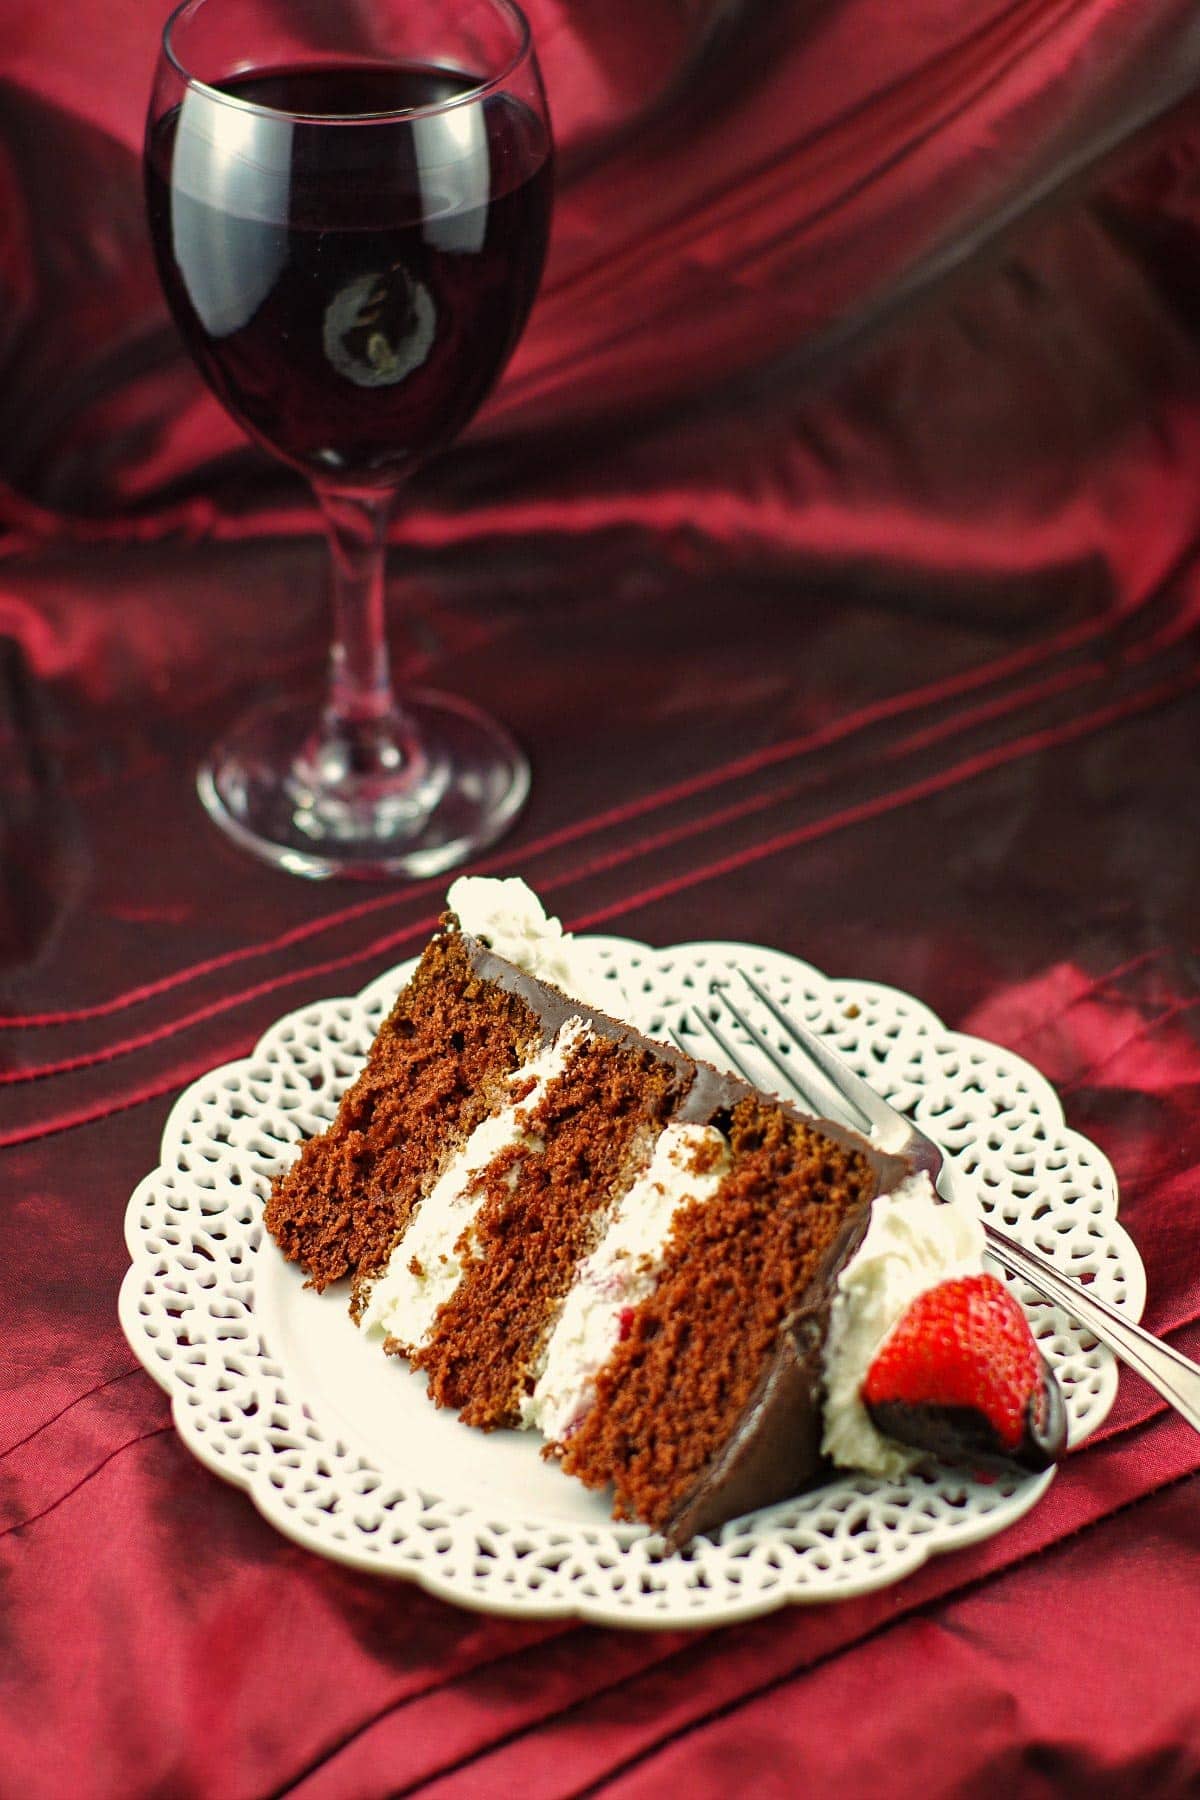 Slice of red wine chocolate strawberry cake on a white plate with glass of red wine in the background